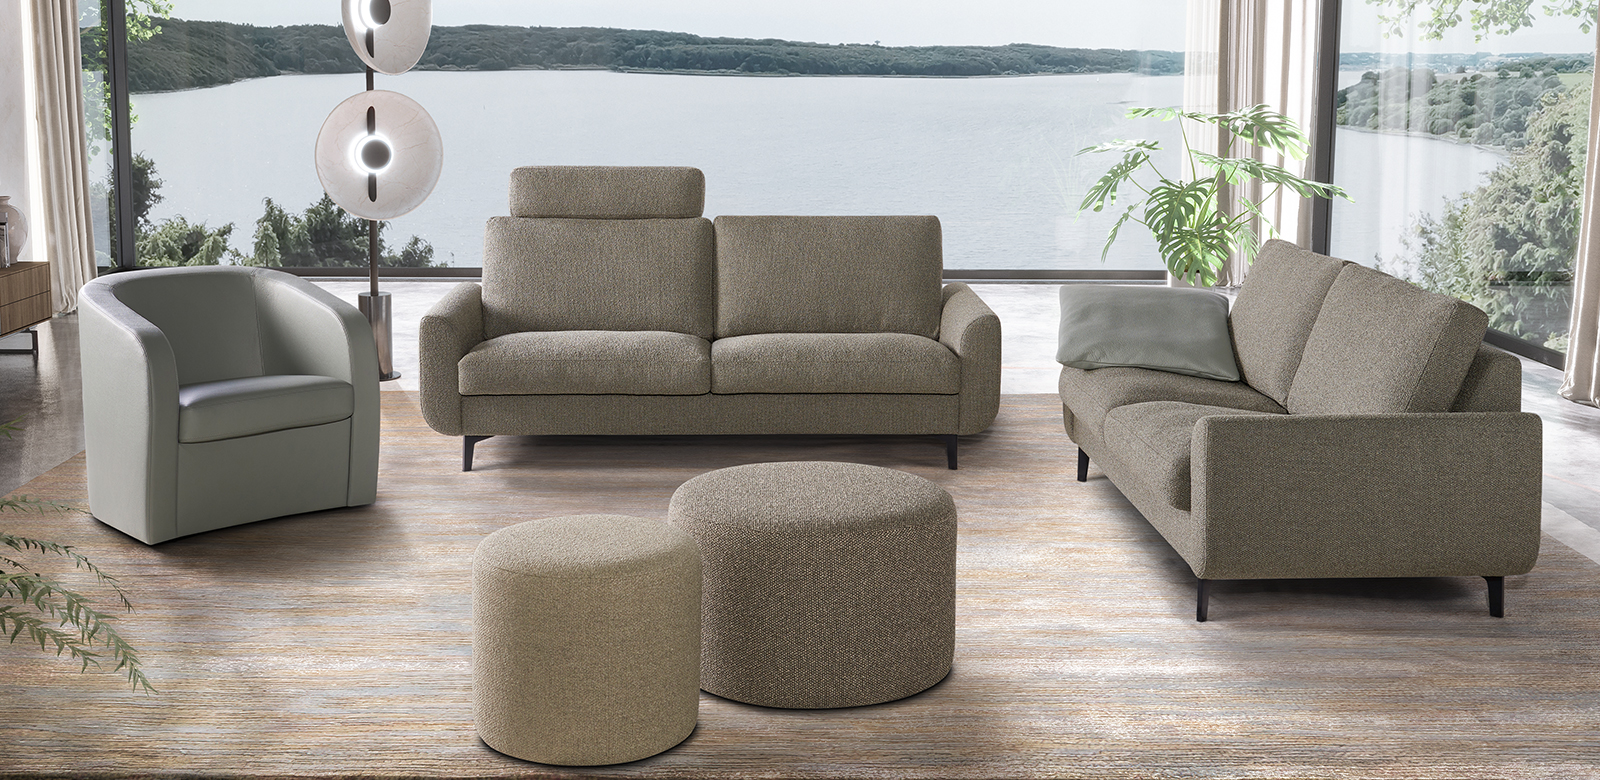 Two CL830 sofas in grey-brown fabric with round stools and matching armchair in grey leather in modern living room with lake view